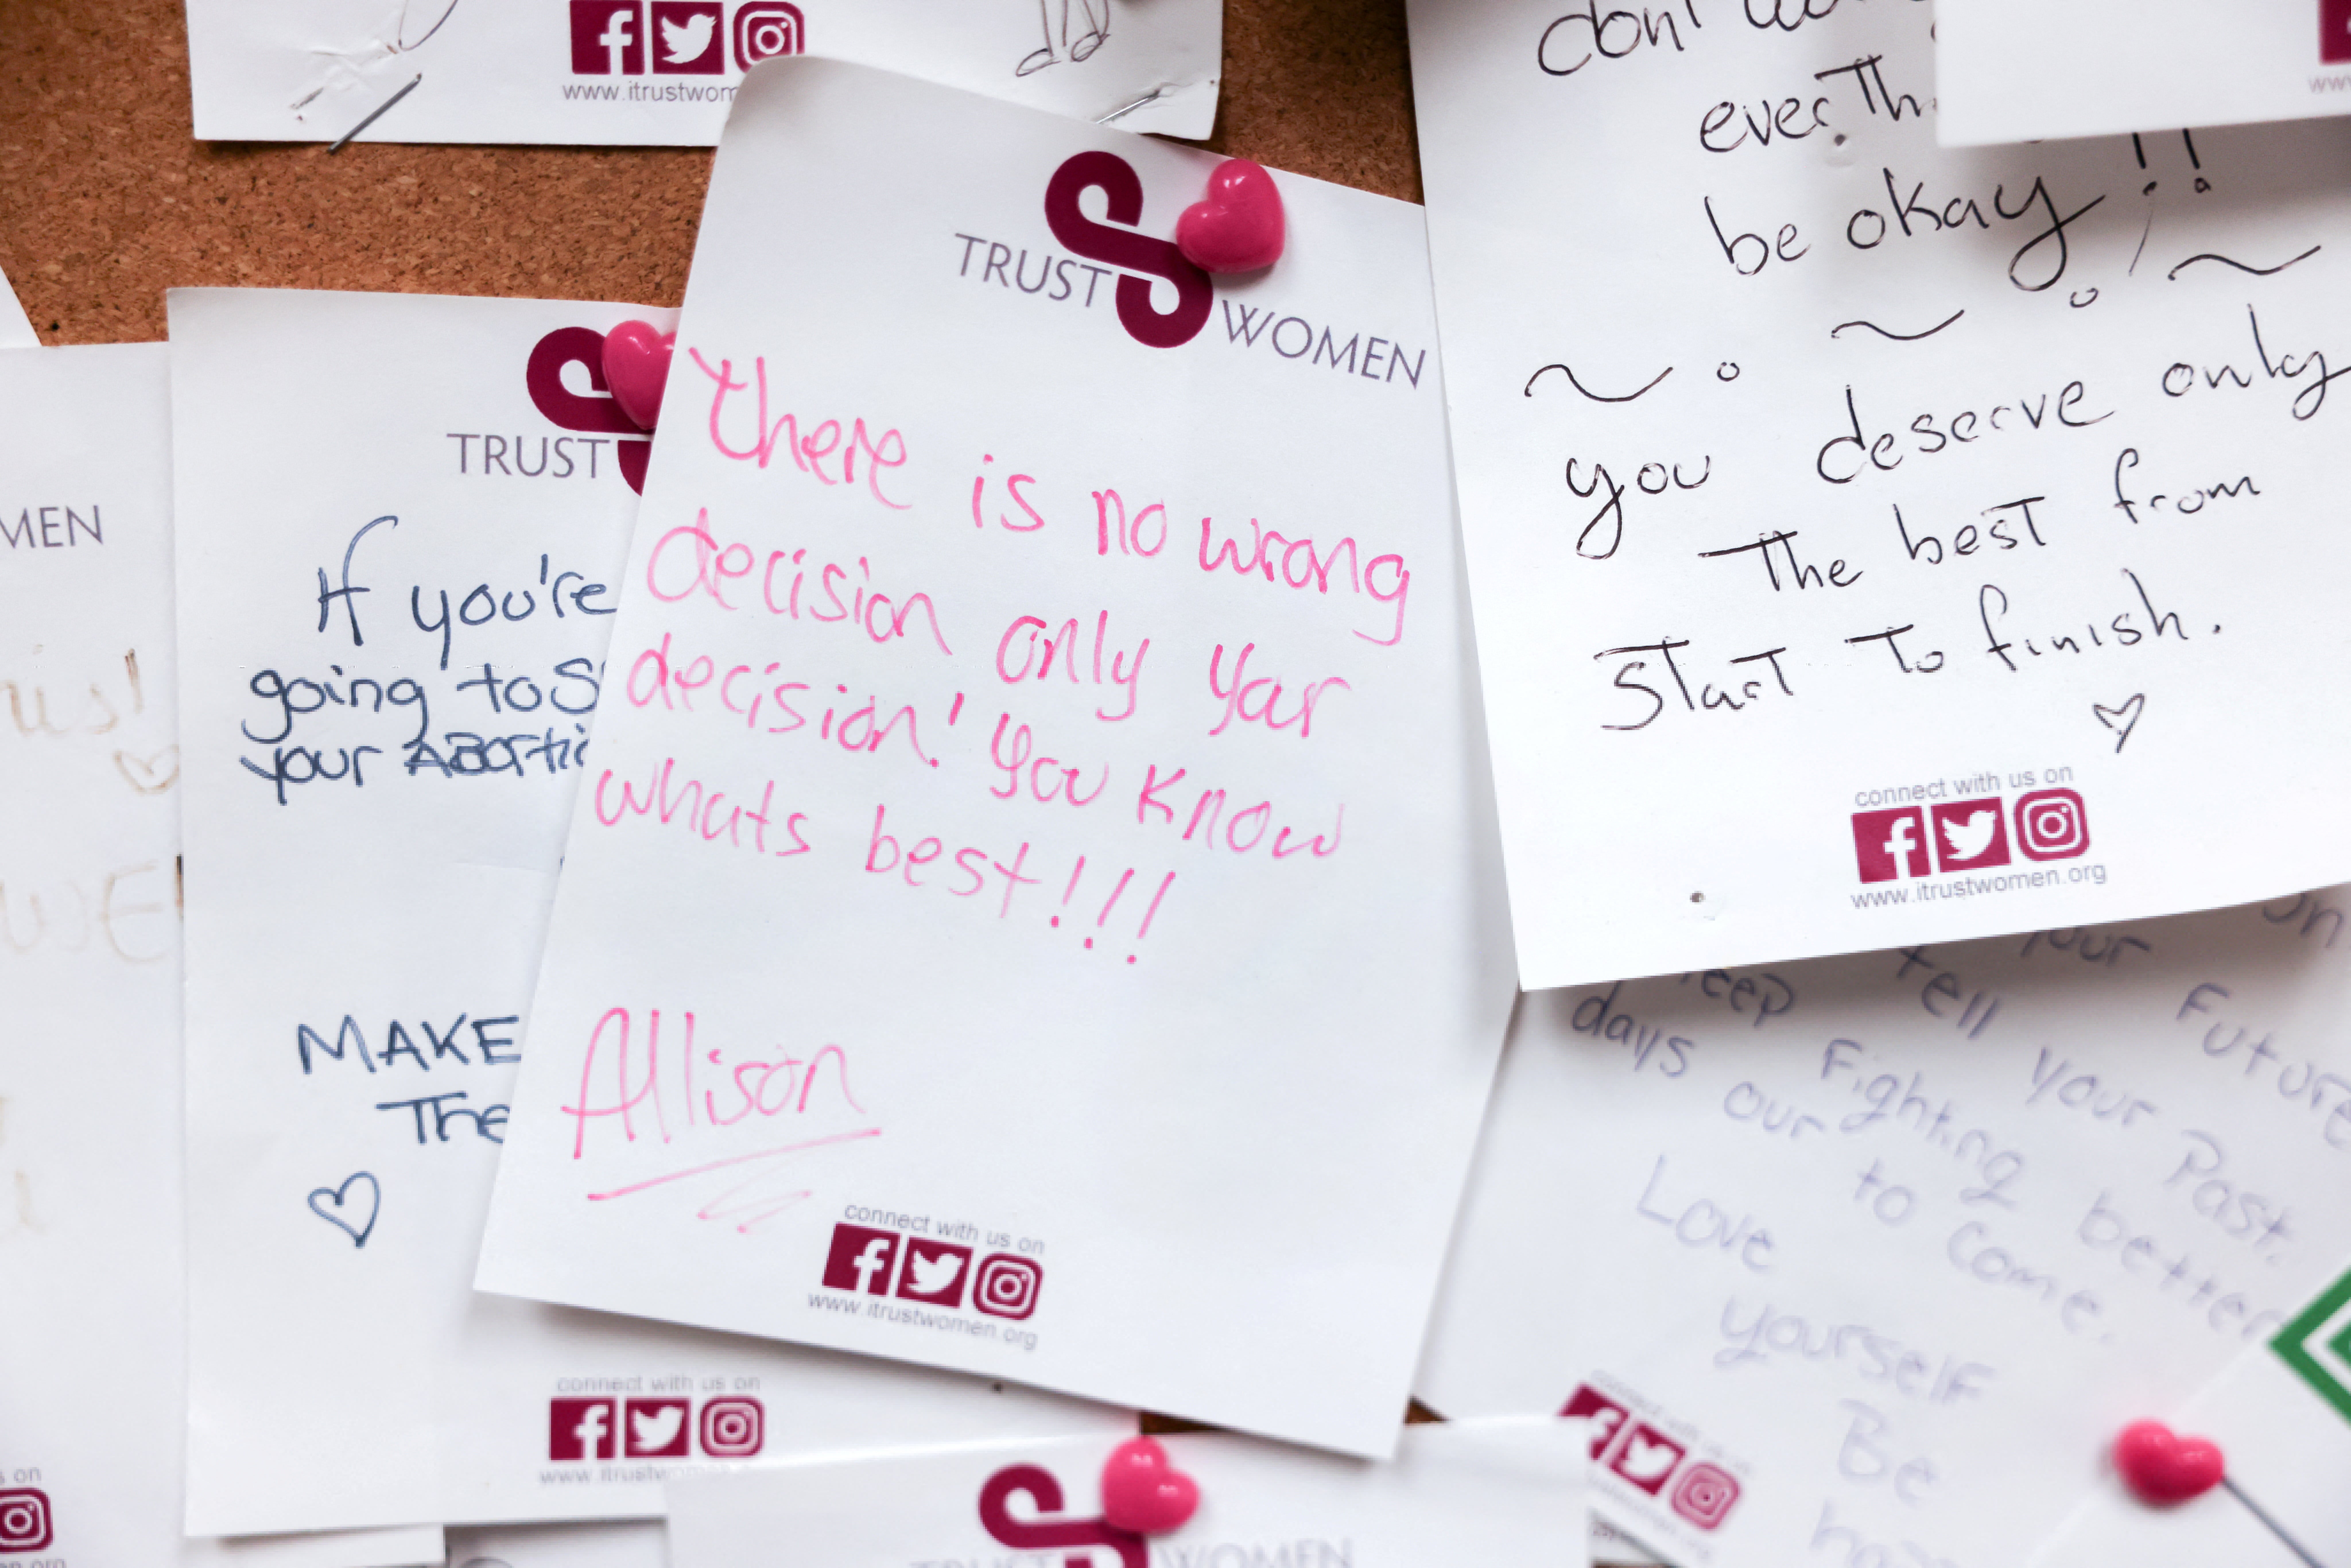 Handwritten notes of encouragement are pinned to the wall of a waiting room at the Trust Women clinic in Oklahoma City